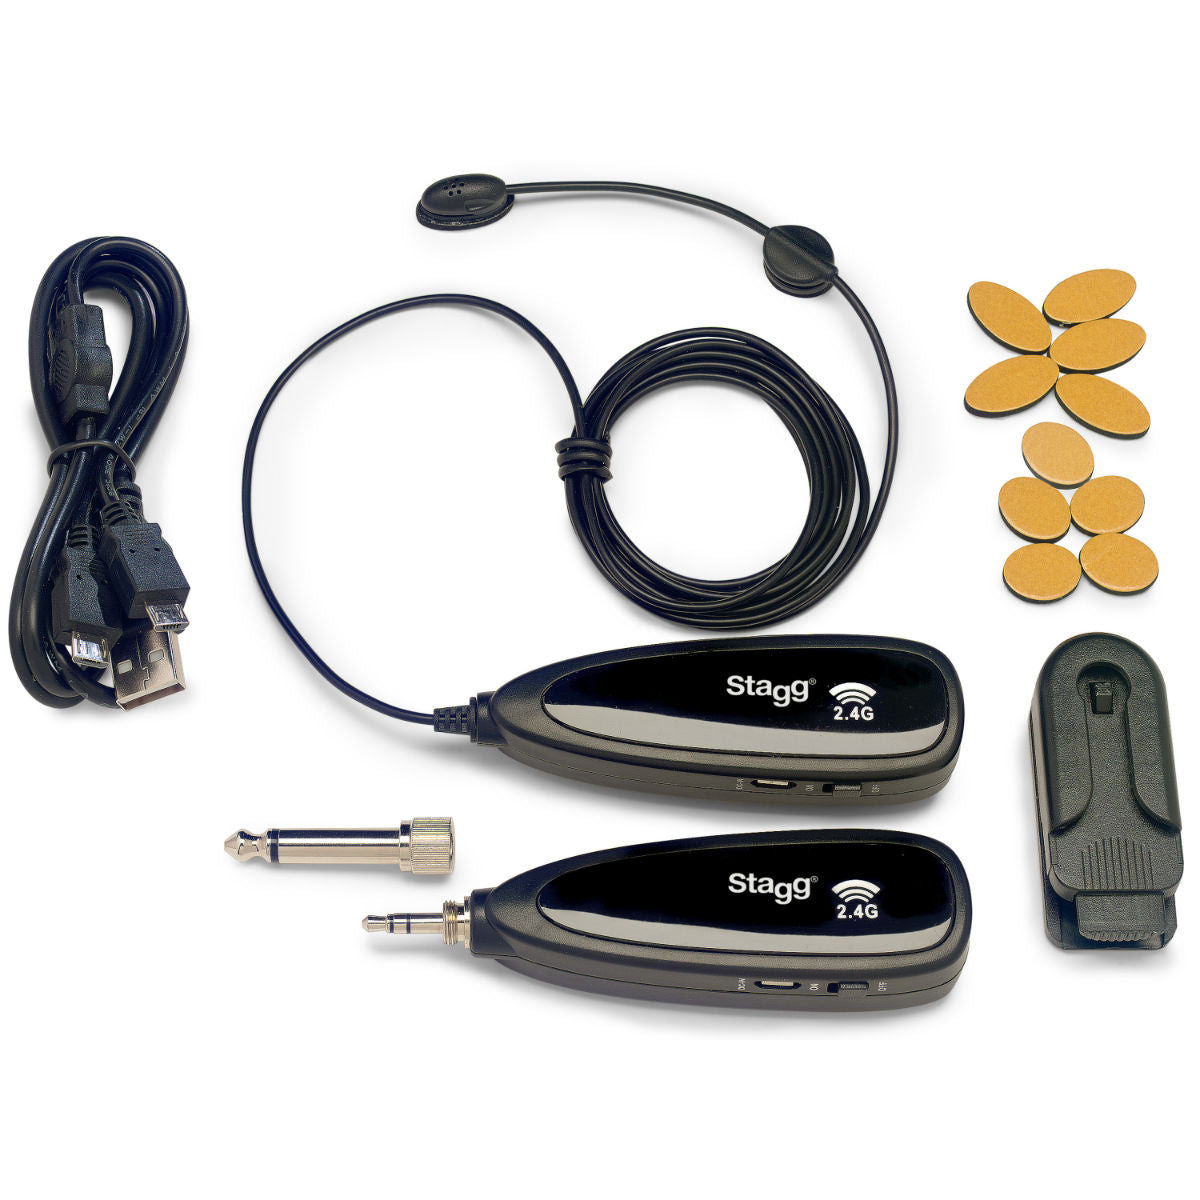 Stagg SUW 10BC Wireless Surface Microphone Set